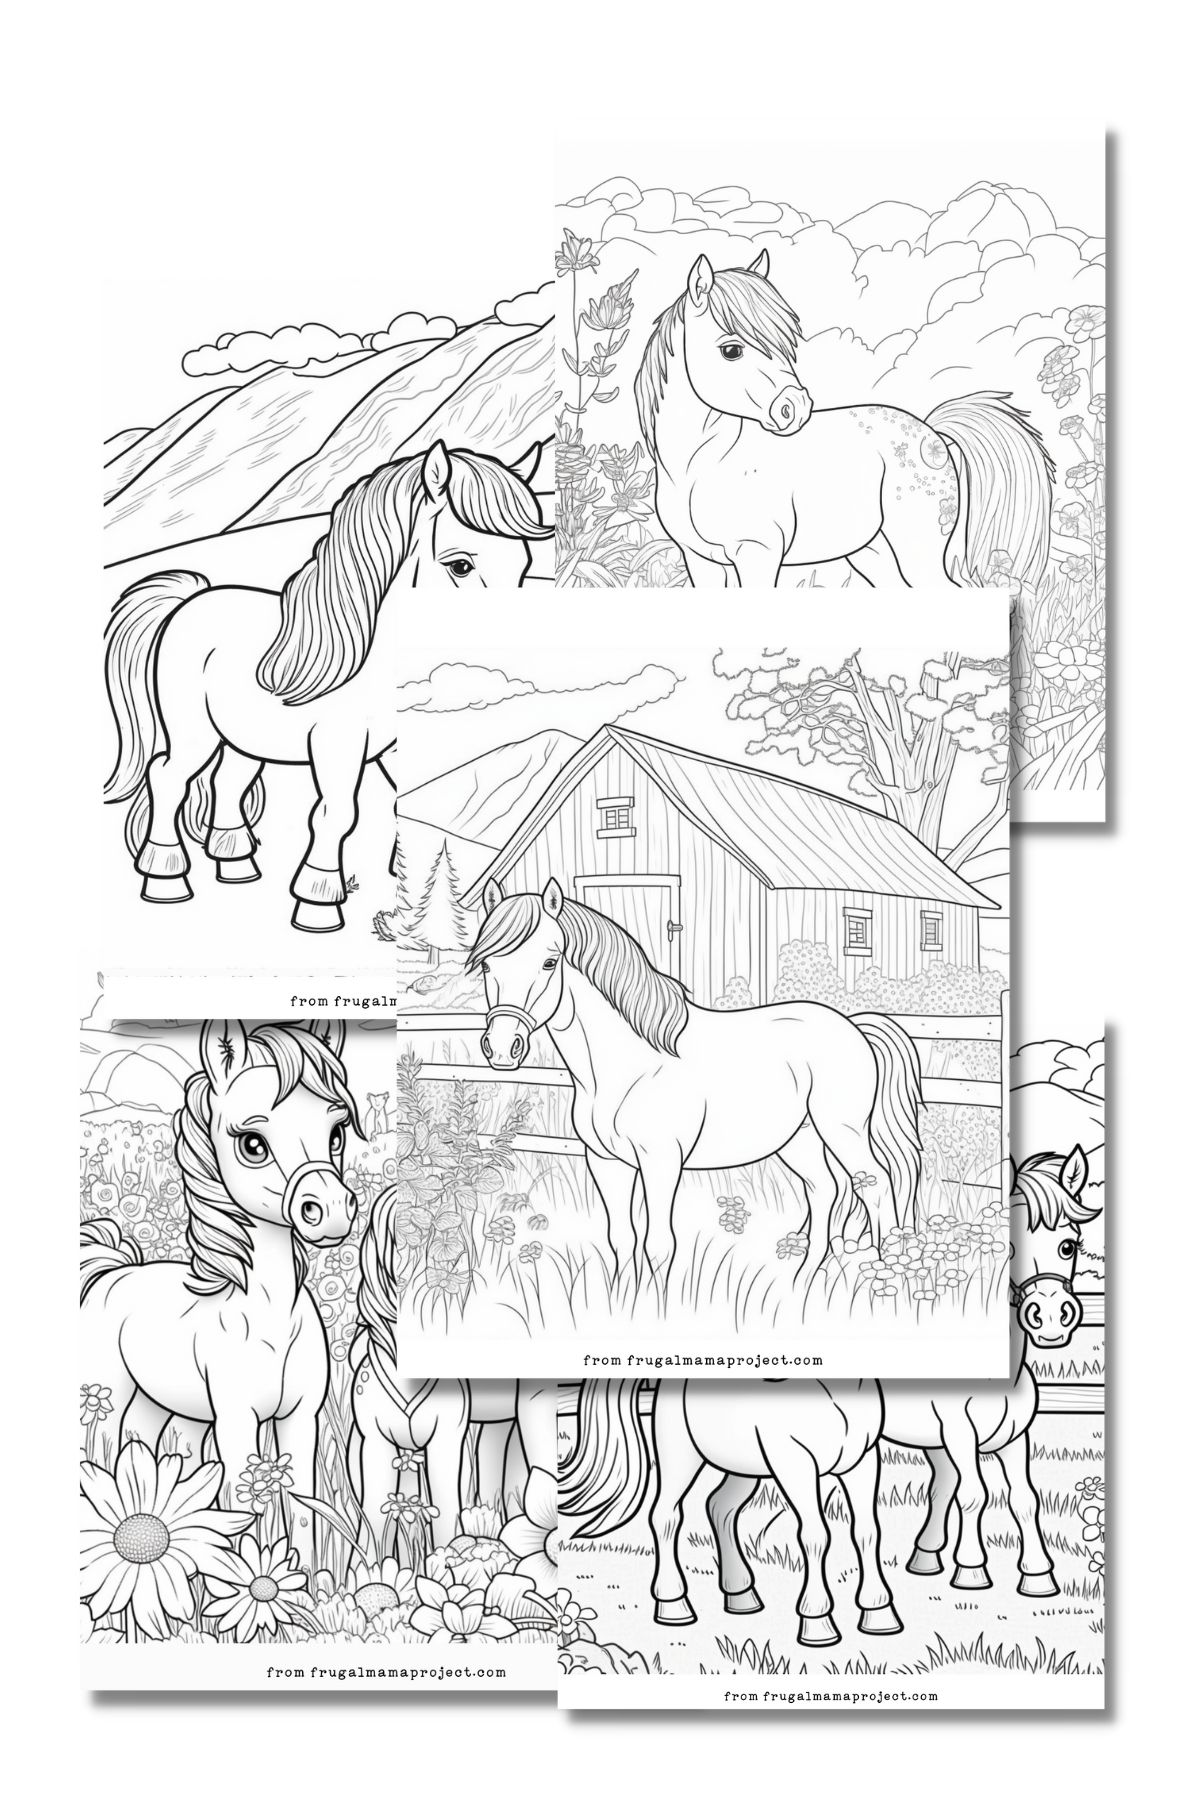 mockup of 5 pony coloring pages.